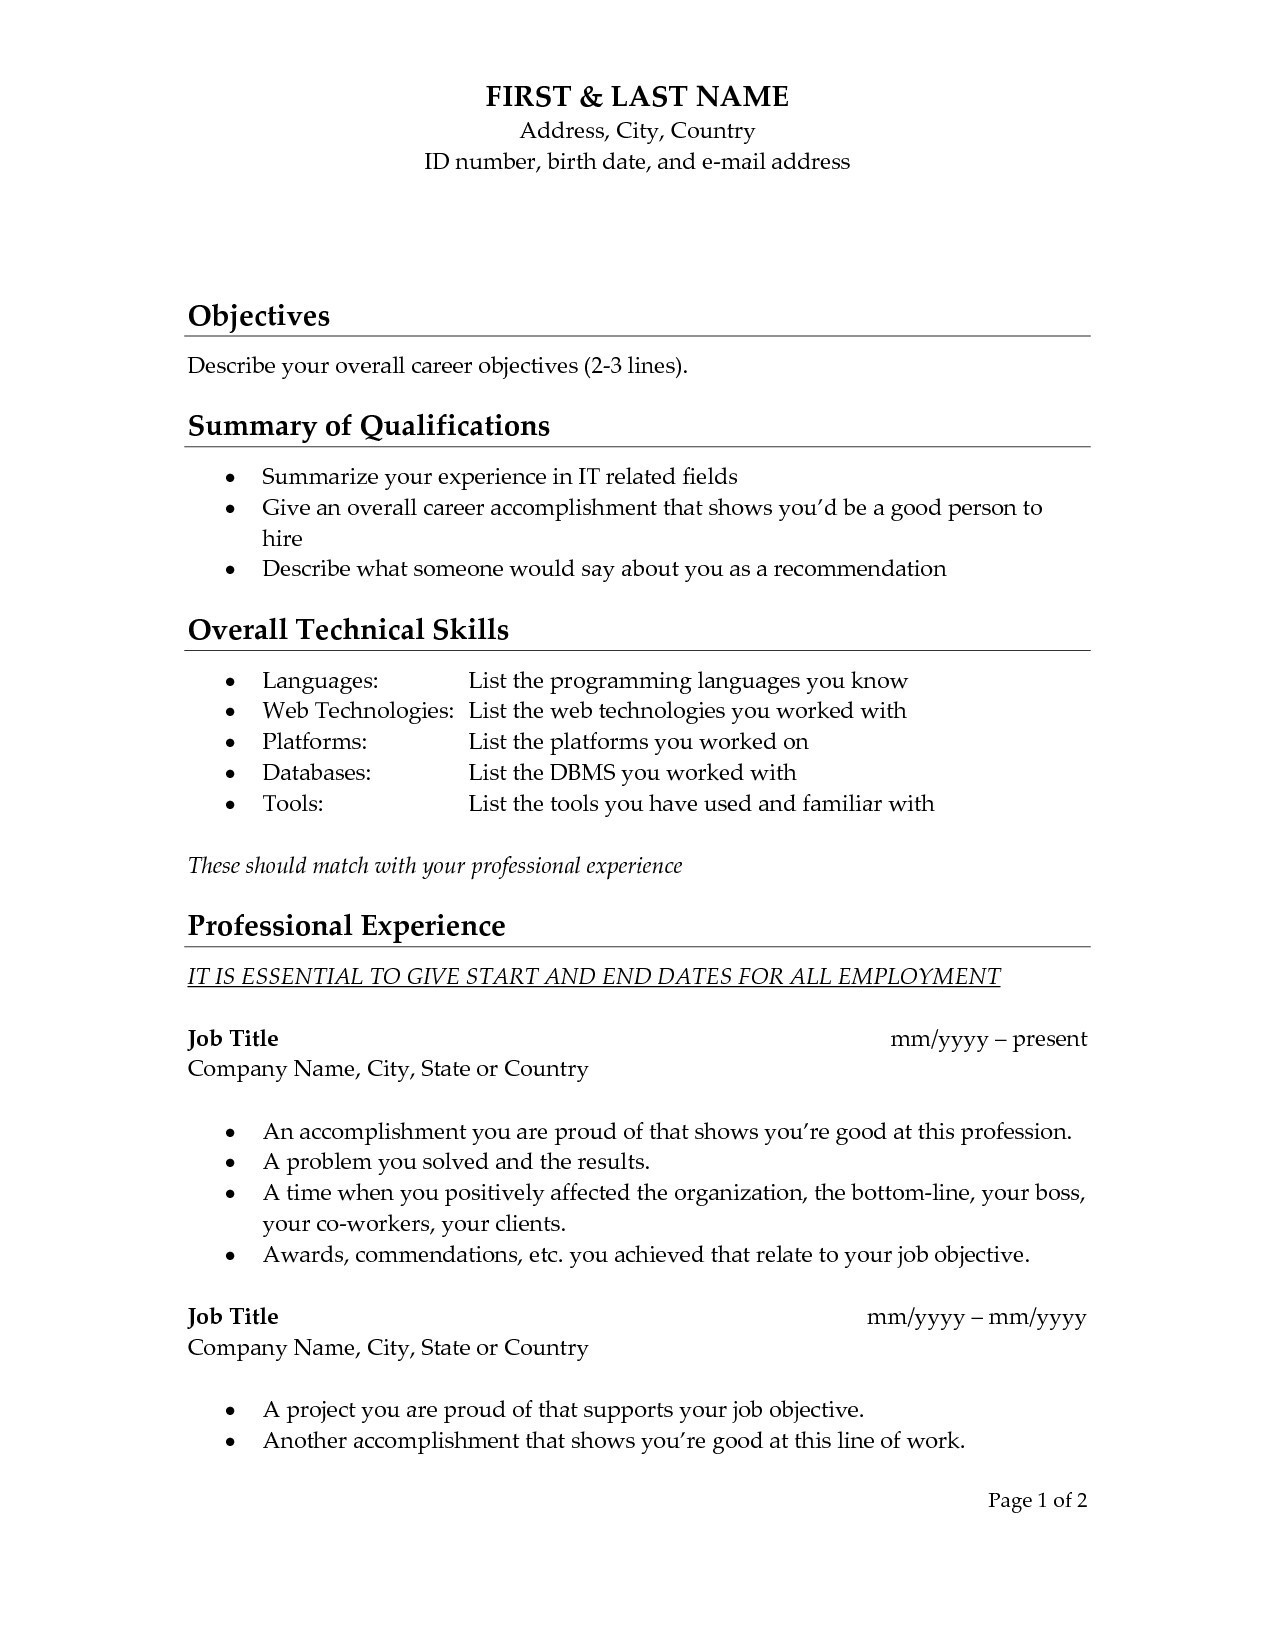 Resume Fancy Builder Funfpandroidco Orthodontic Assistant